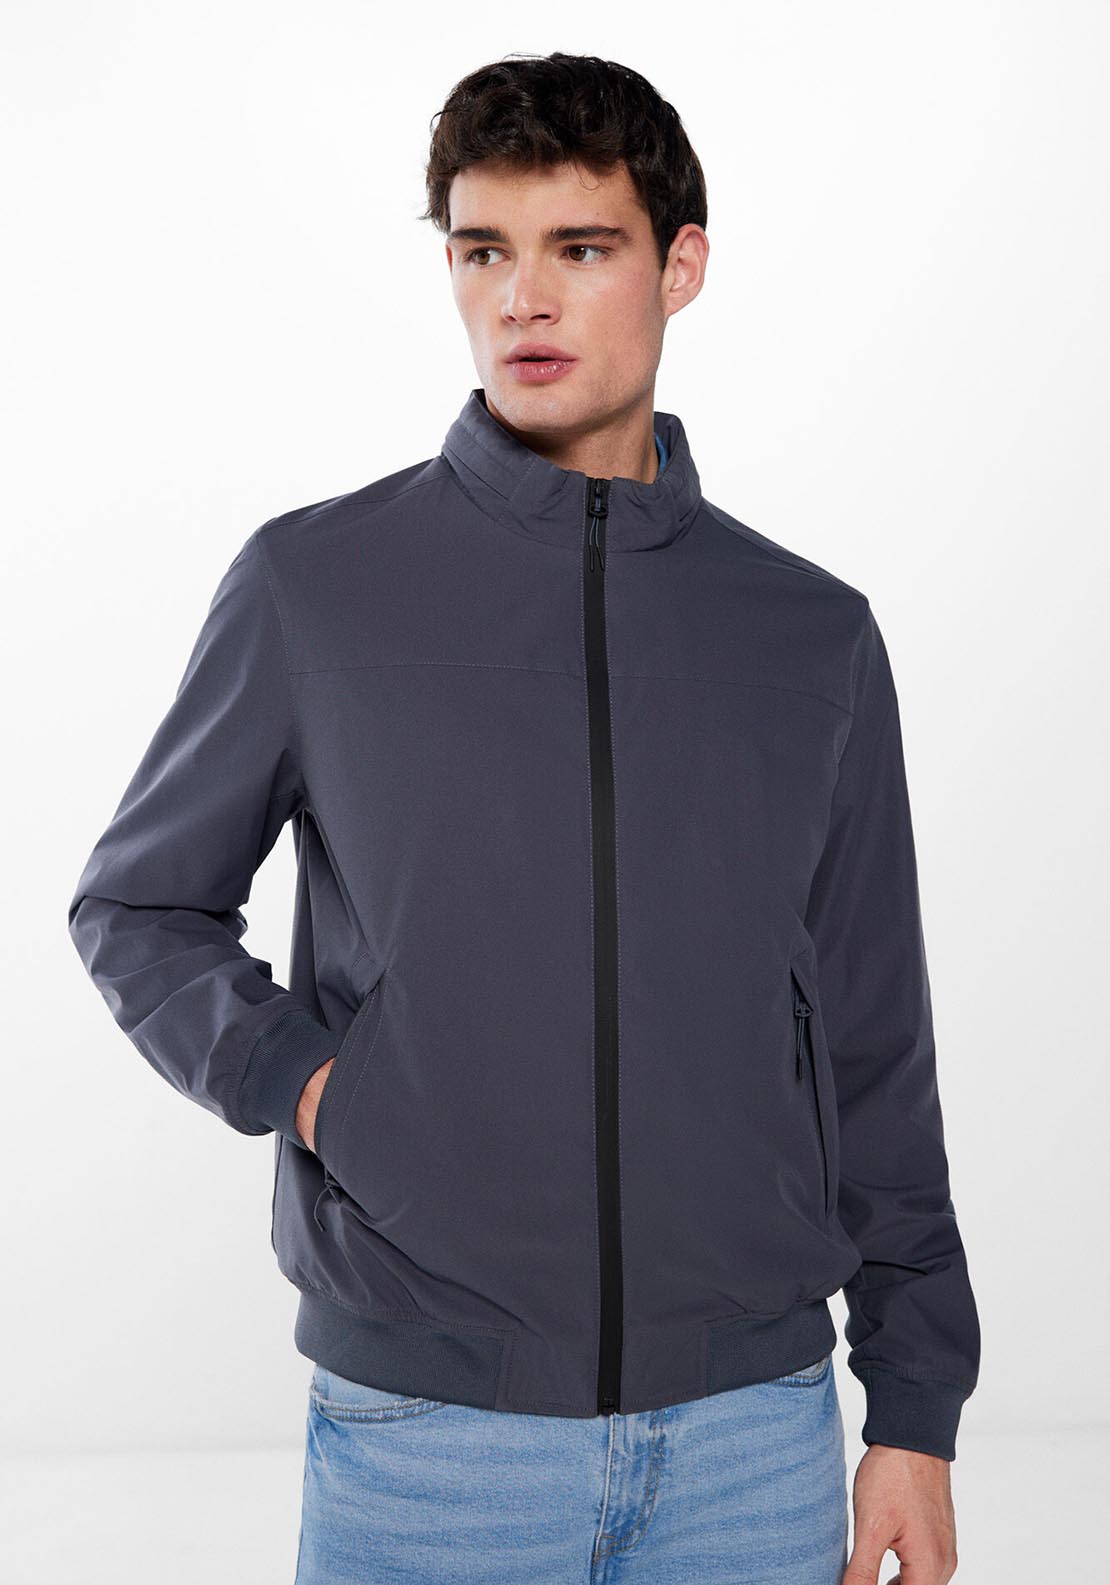 Springfield Technical jacket - Blue 1 Shaws Department Stores